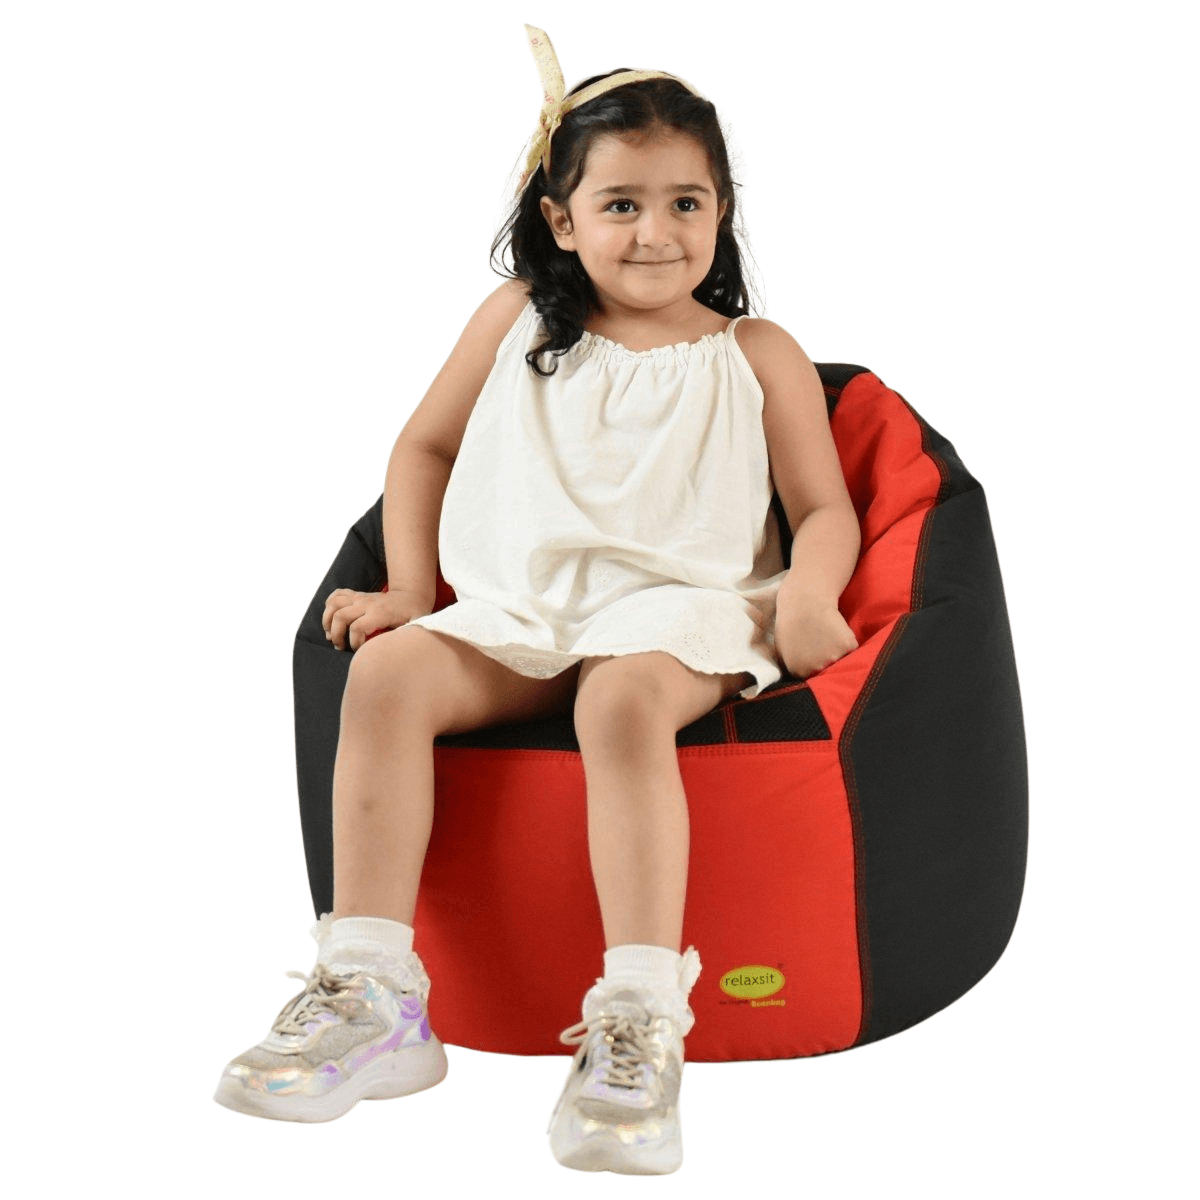 Sports chair bean bag sofa - Kids - Relaxsit Middle East